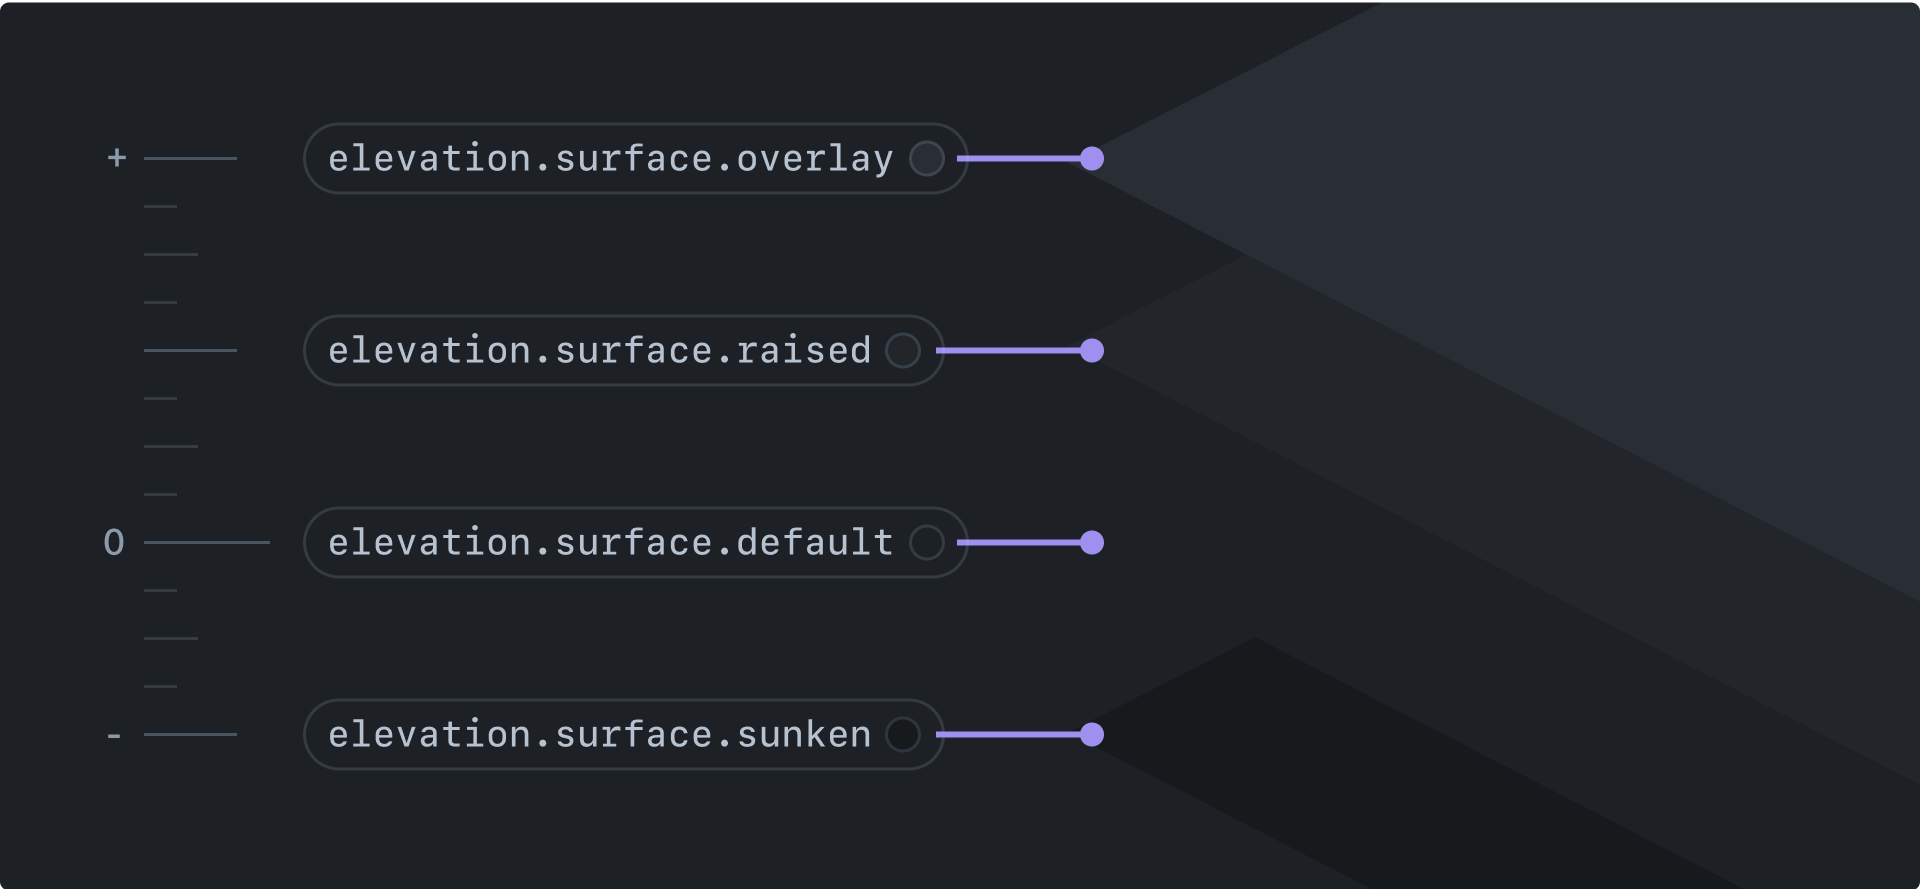 A labelled diagram showing the four main surface levels in dark mode from highest to lowest: overlay, raised, default, and sunken. Overlay is a slightly lighter shade of dark grey. As the surface levels go down, they progressively get darker. Each surface has an associated token, such as "elevation.surface.default" or "elevation.surface.raised".